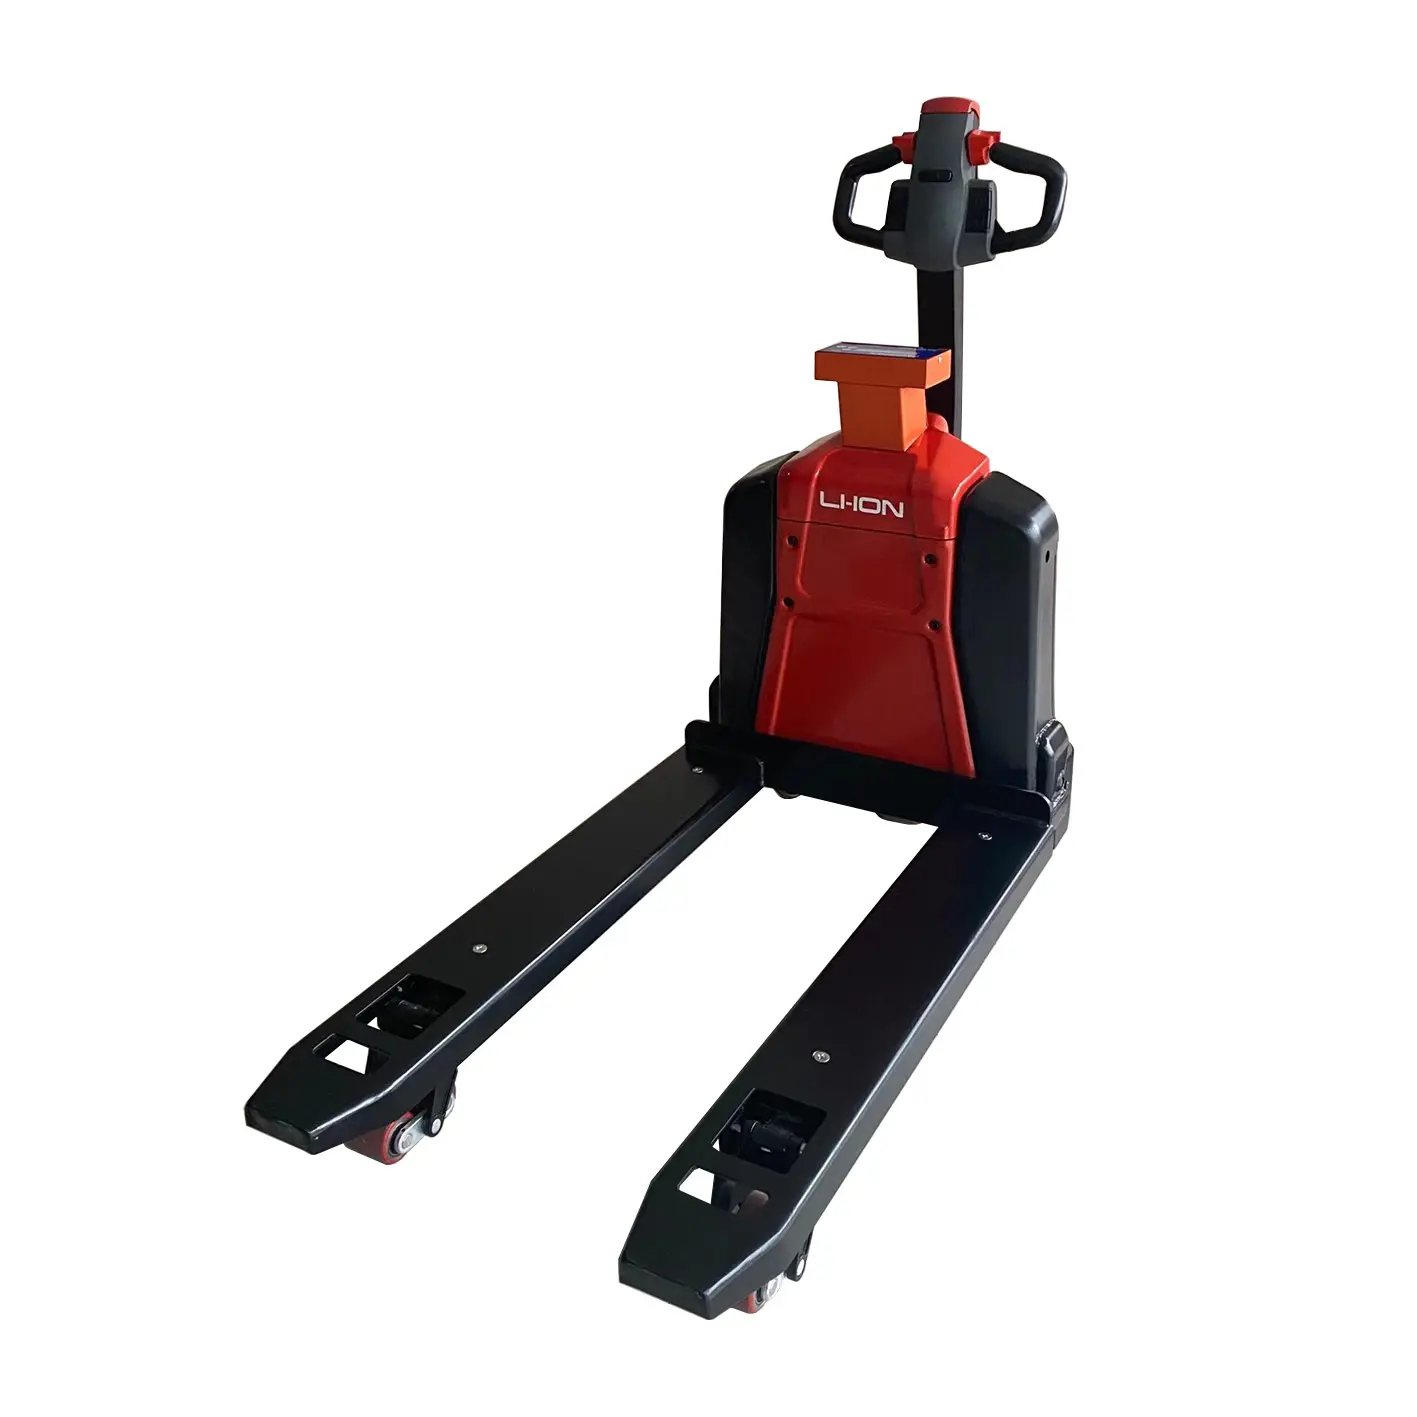 0.5-2t hydraulic weighing scale electric pallet jack with back and forth driven Li-ion battery power